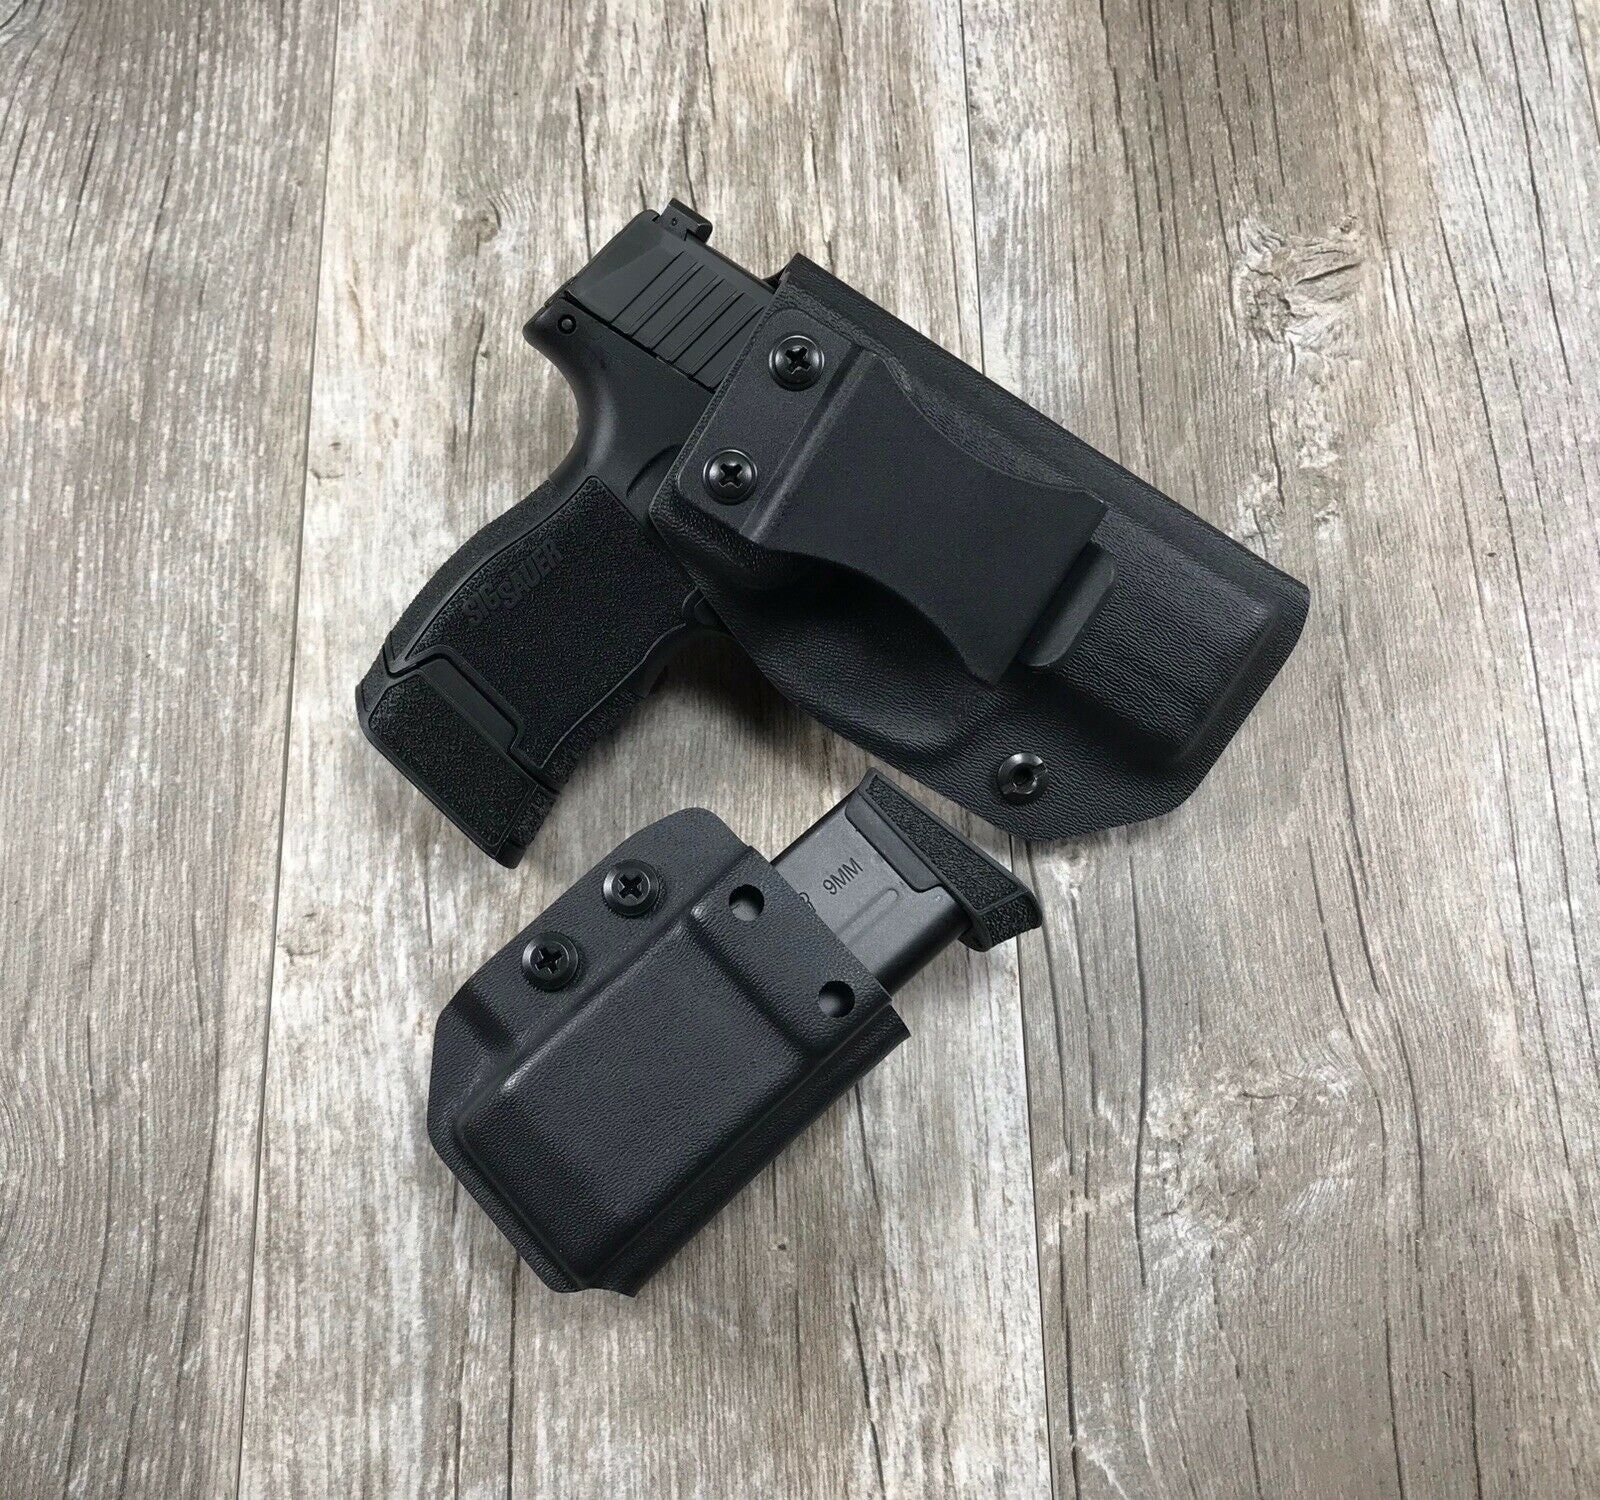 Magazine Carrier Holster Carrier By SDH Swift Draw Holsters Belt Loops 